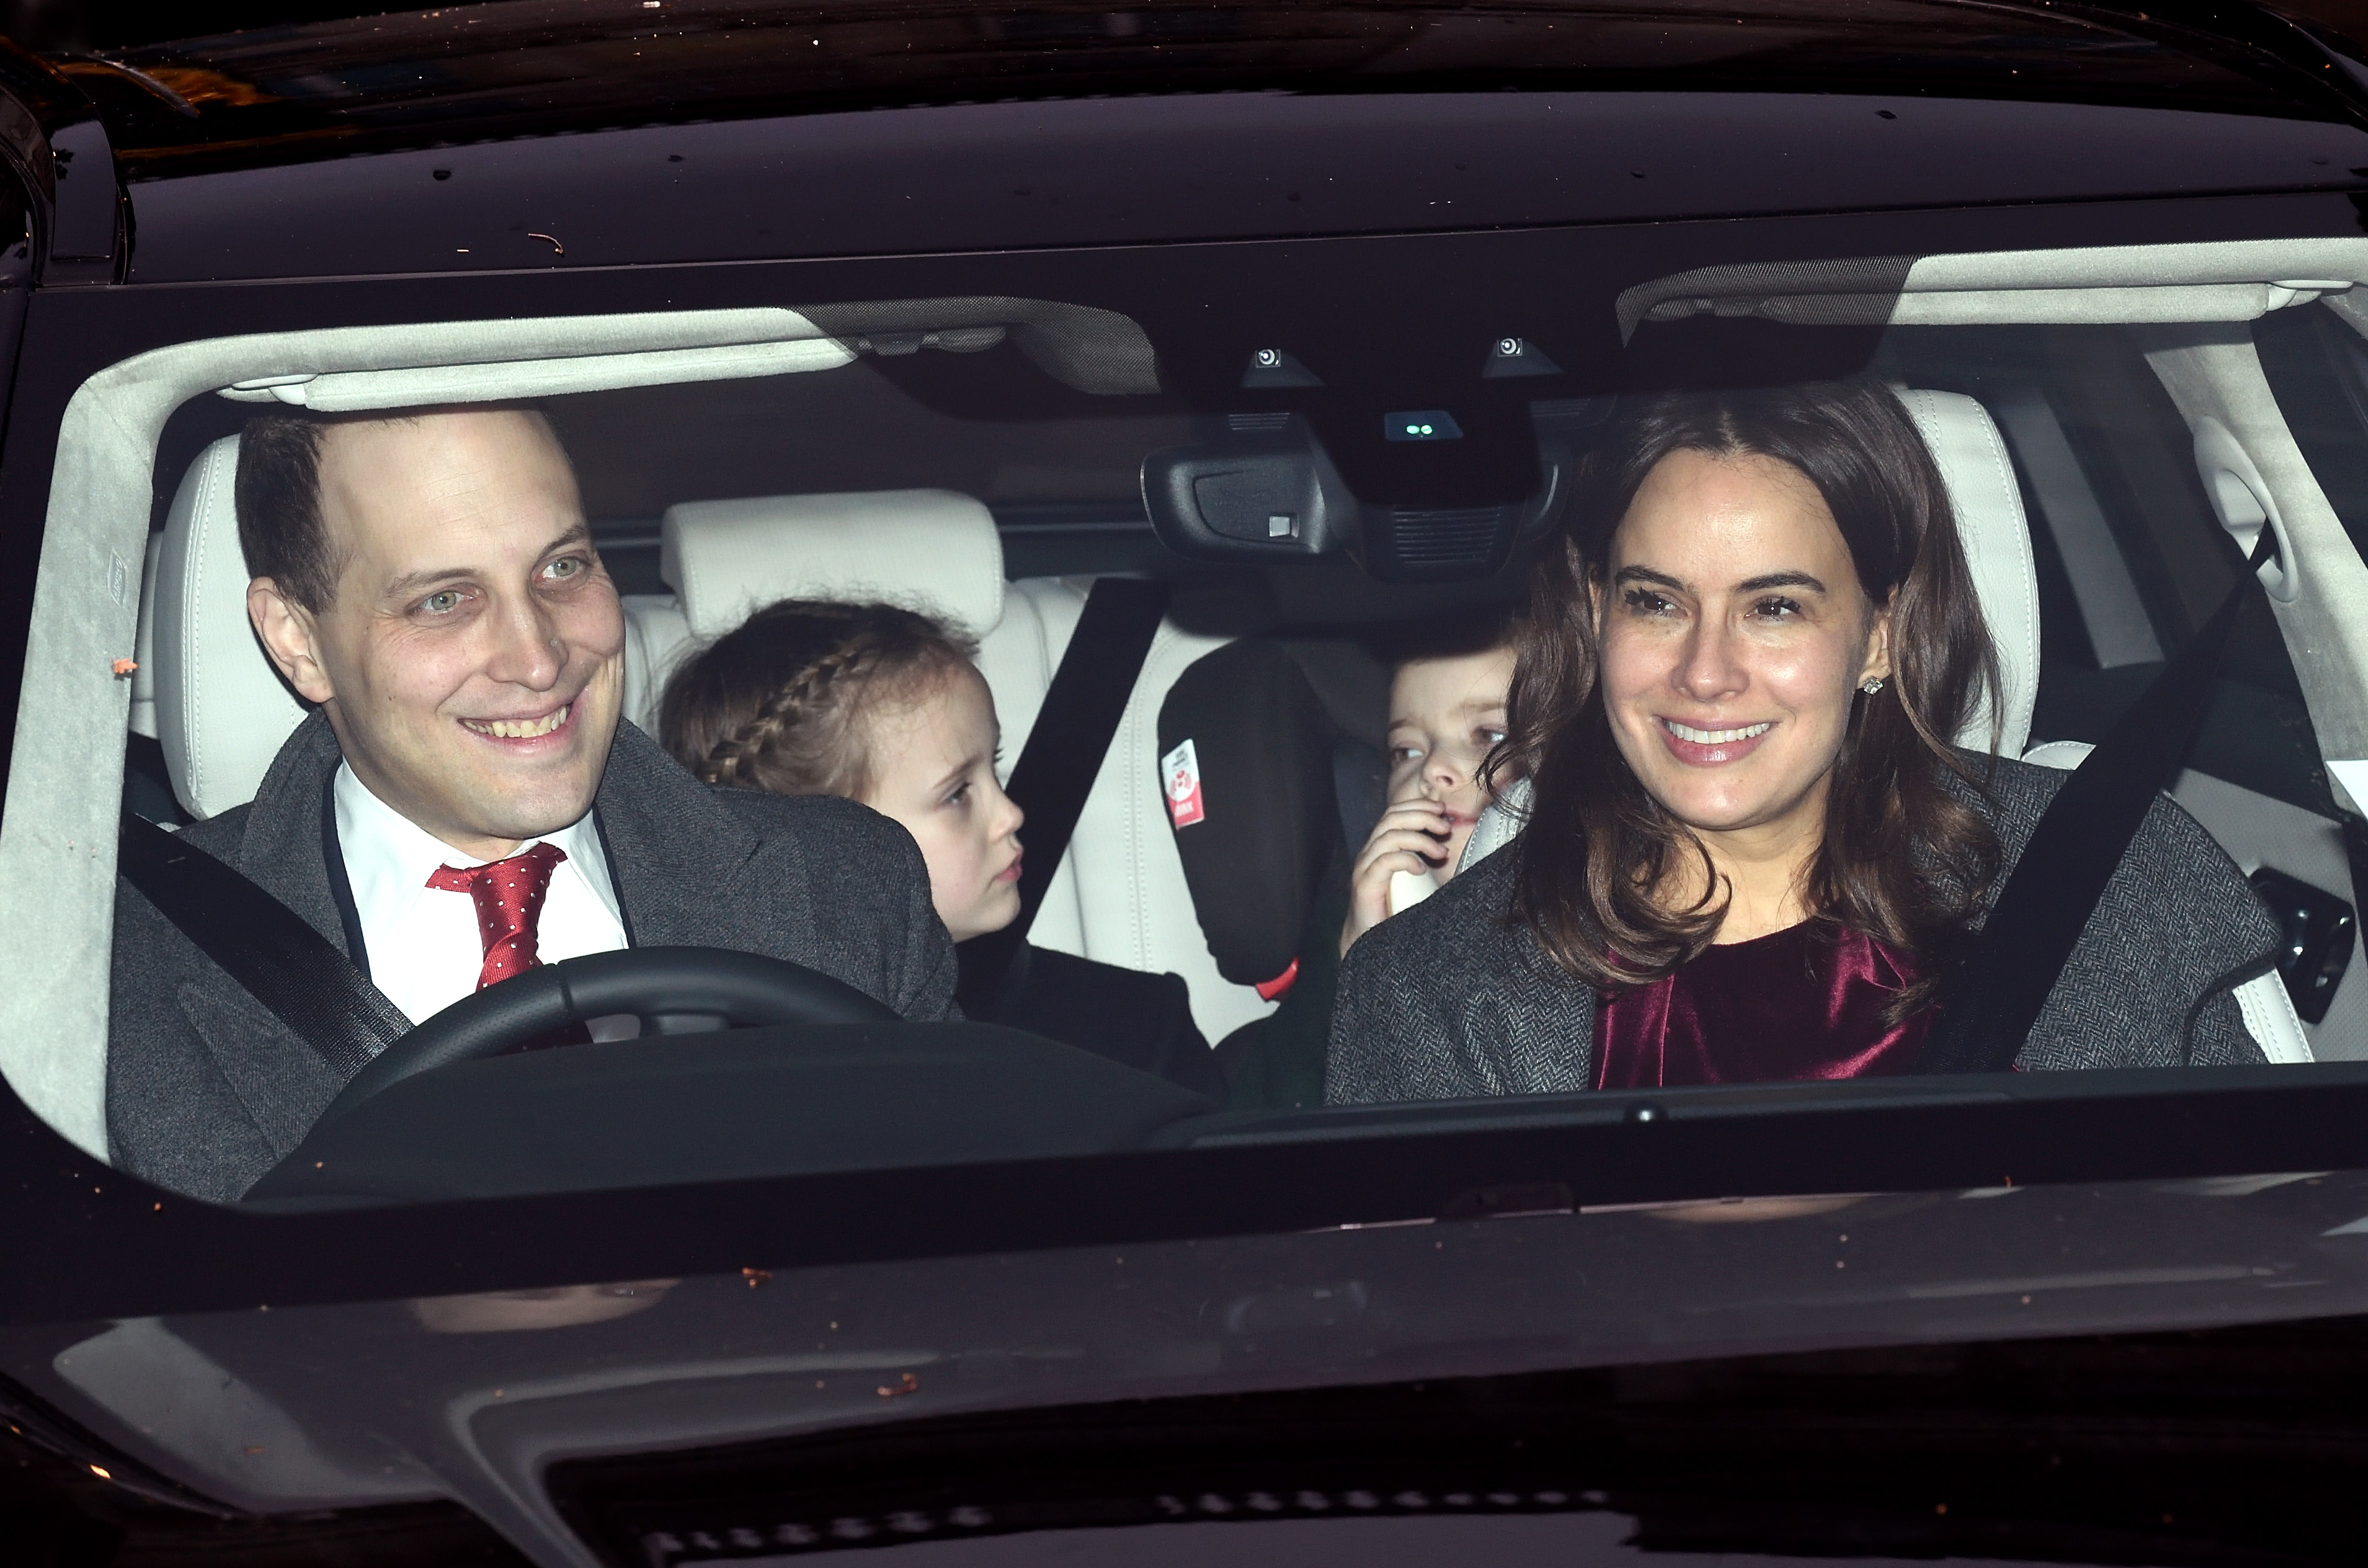 Lord Frederick Windsor with daughters Maud Windsor, Isabella Windsor and wife Sophie driving in a car